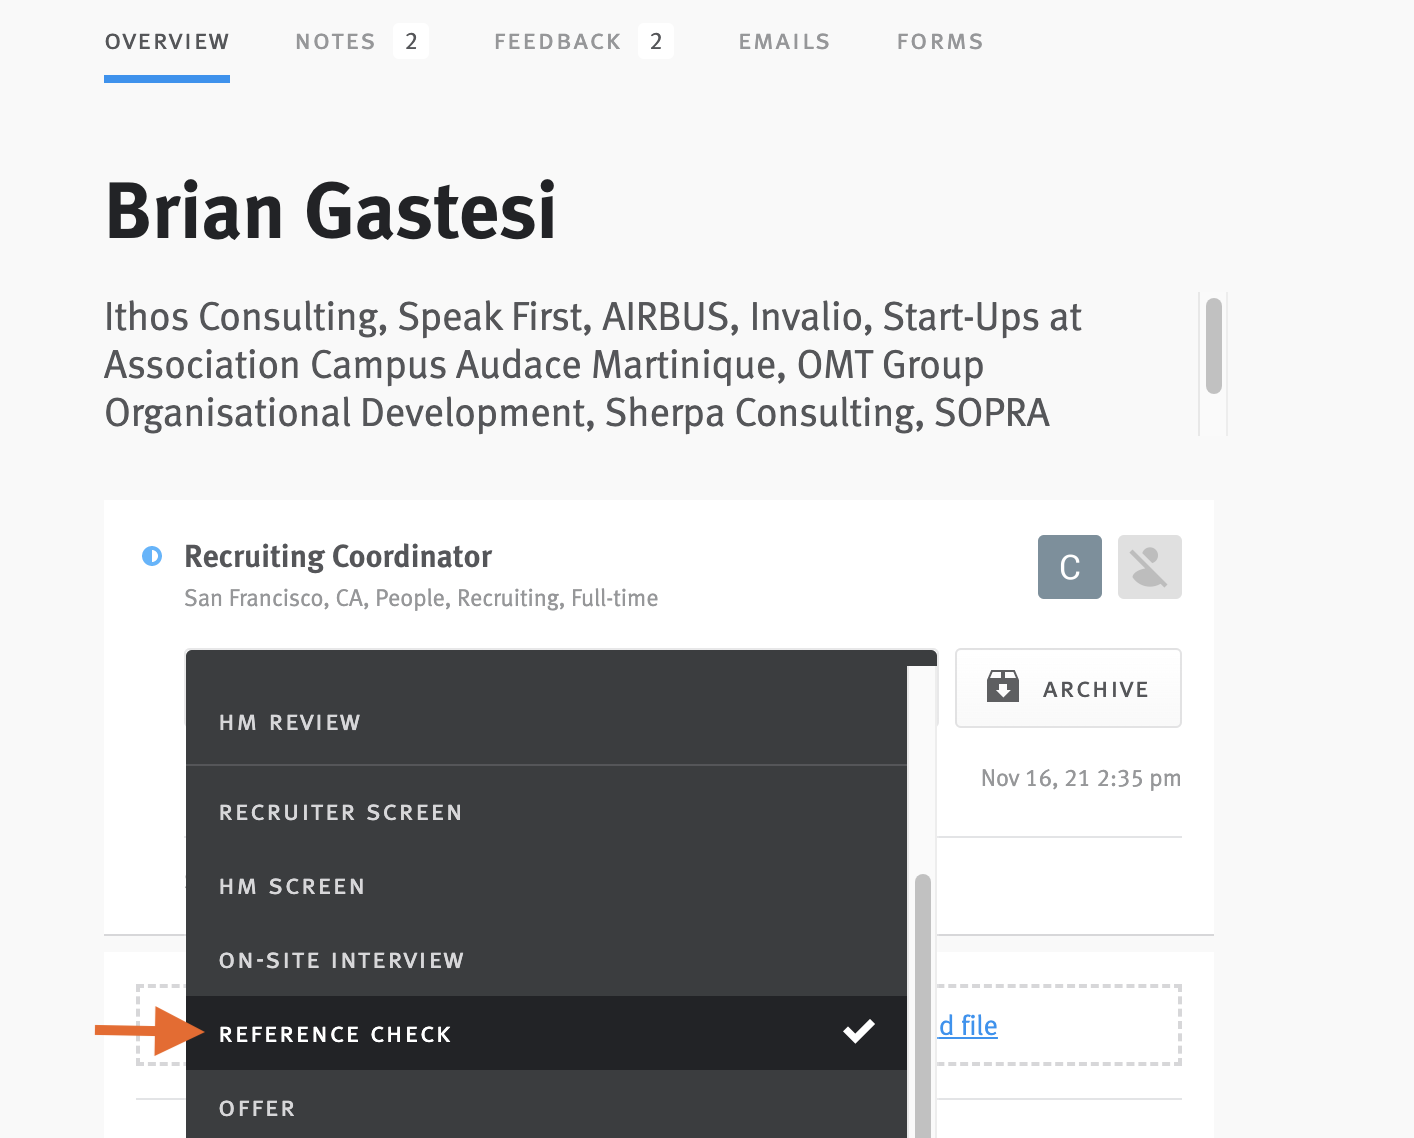 Arrow pointing to reference check stage in stage menu expanded on candidate profile.